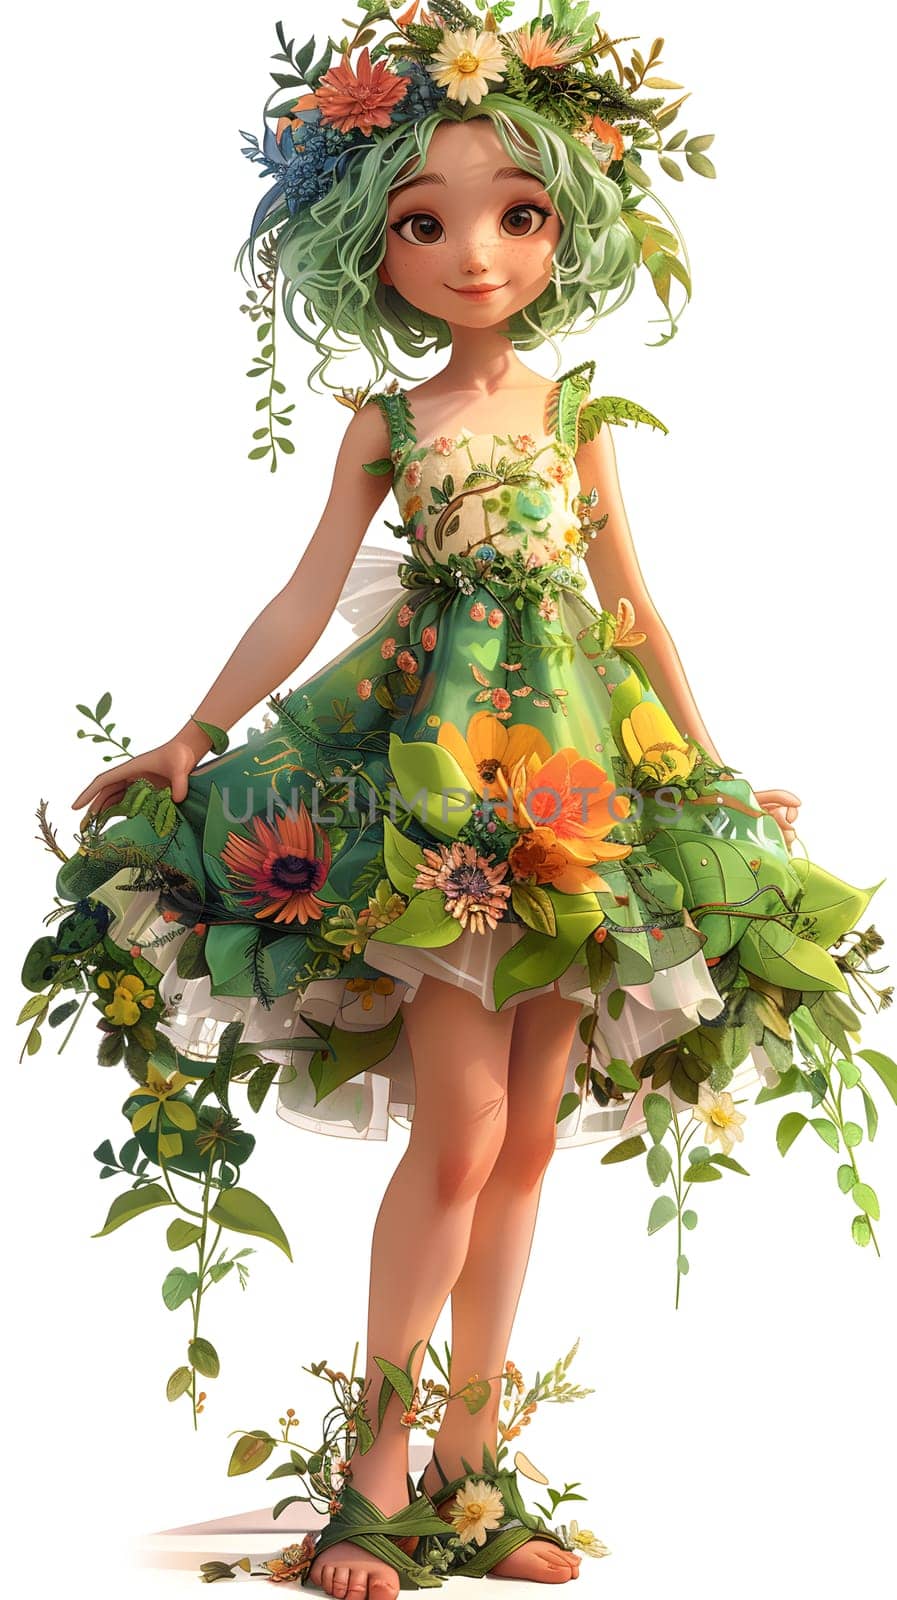 A doll with green hair in a green dress and flower wreath by Nadtochiy